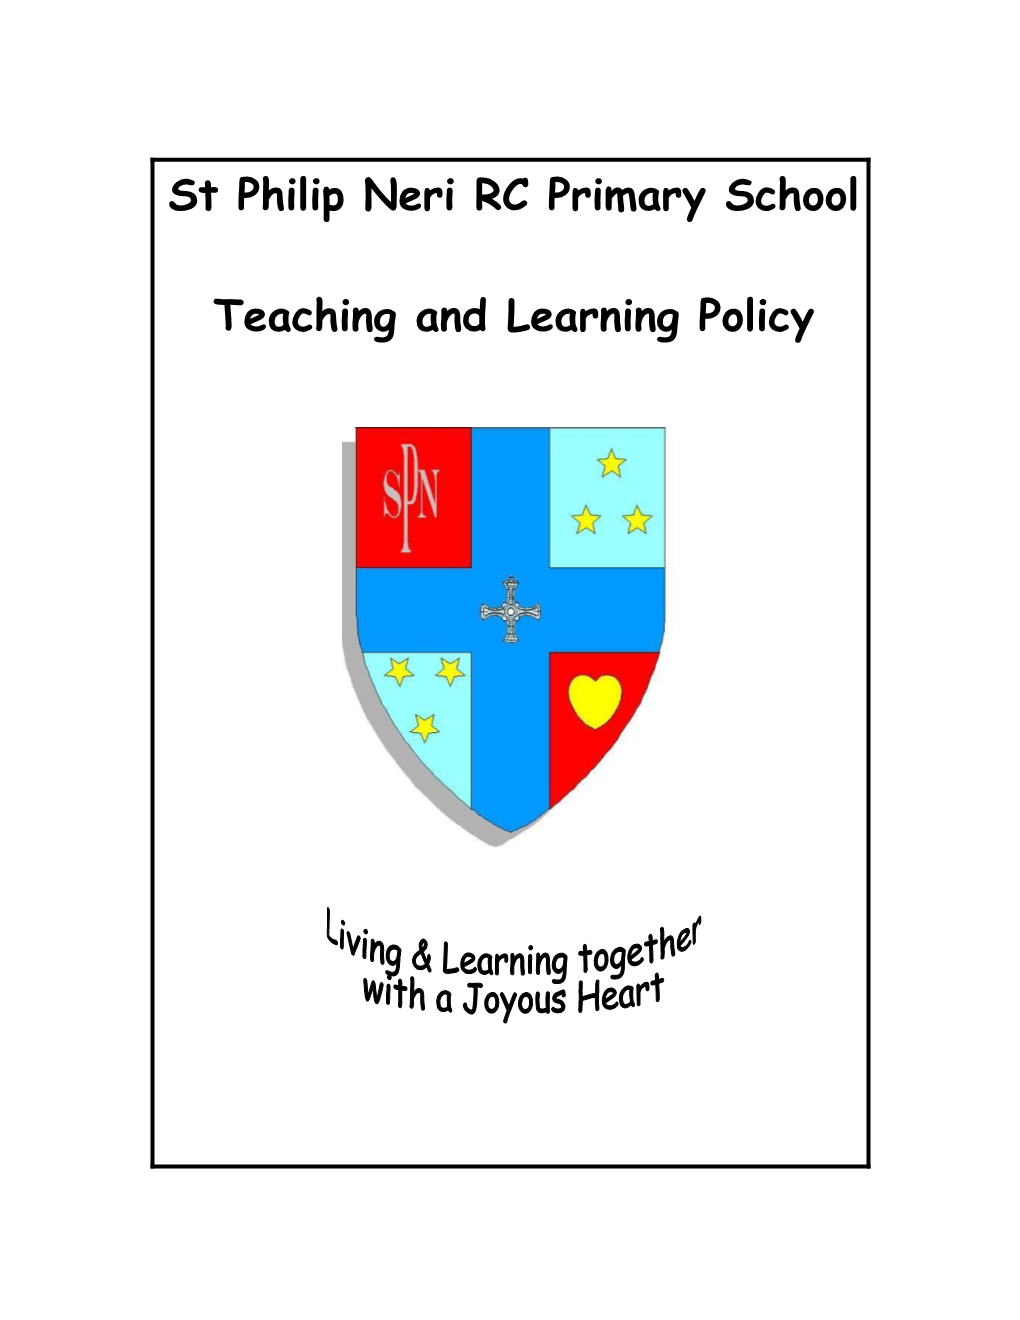 St Philip Neri Policy for Teaching and Learing